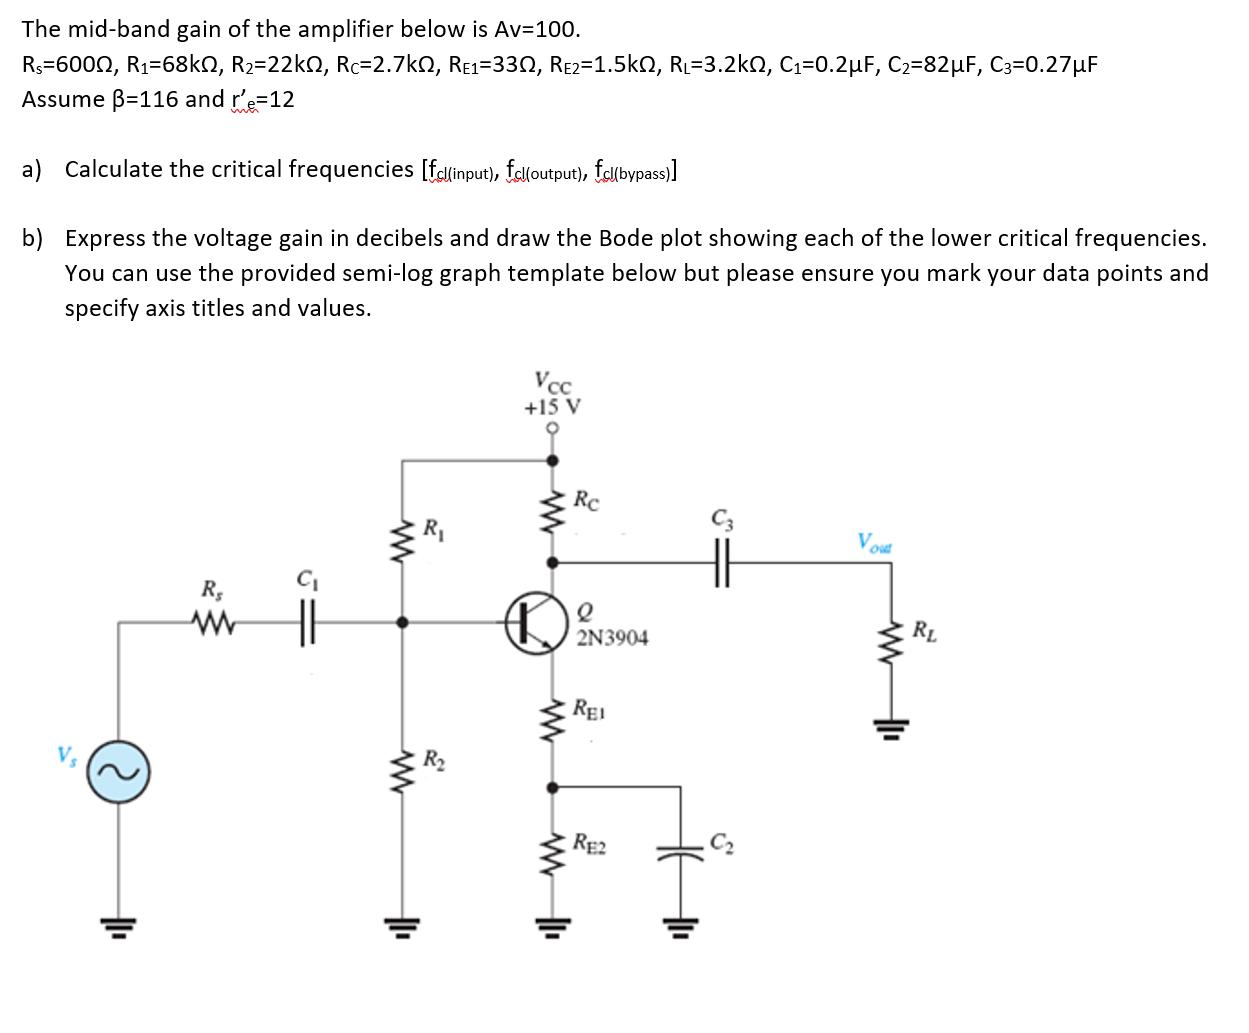 The mid-band gain of the amplifier below is Av=100. Rs=6000, R-68kN, R=22kN, Rc=2.7kQ, R1=330, RE2=1.5k,